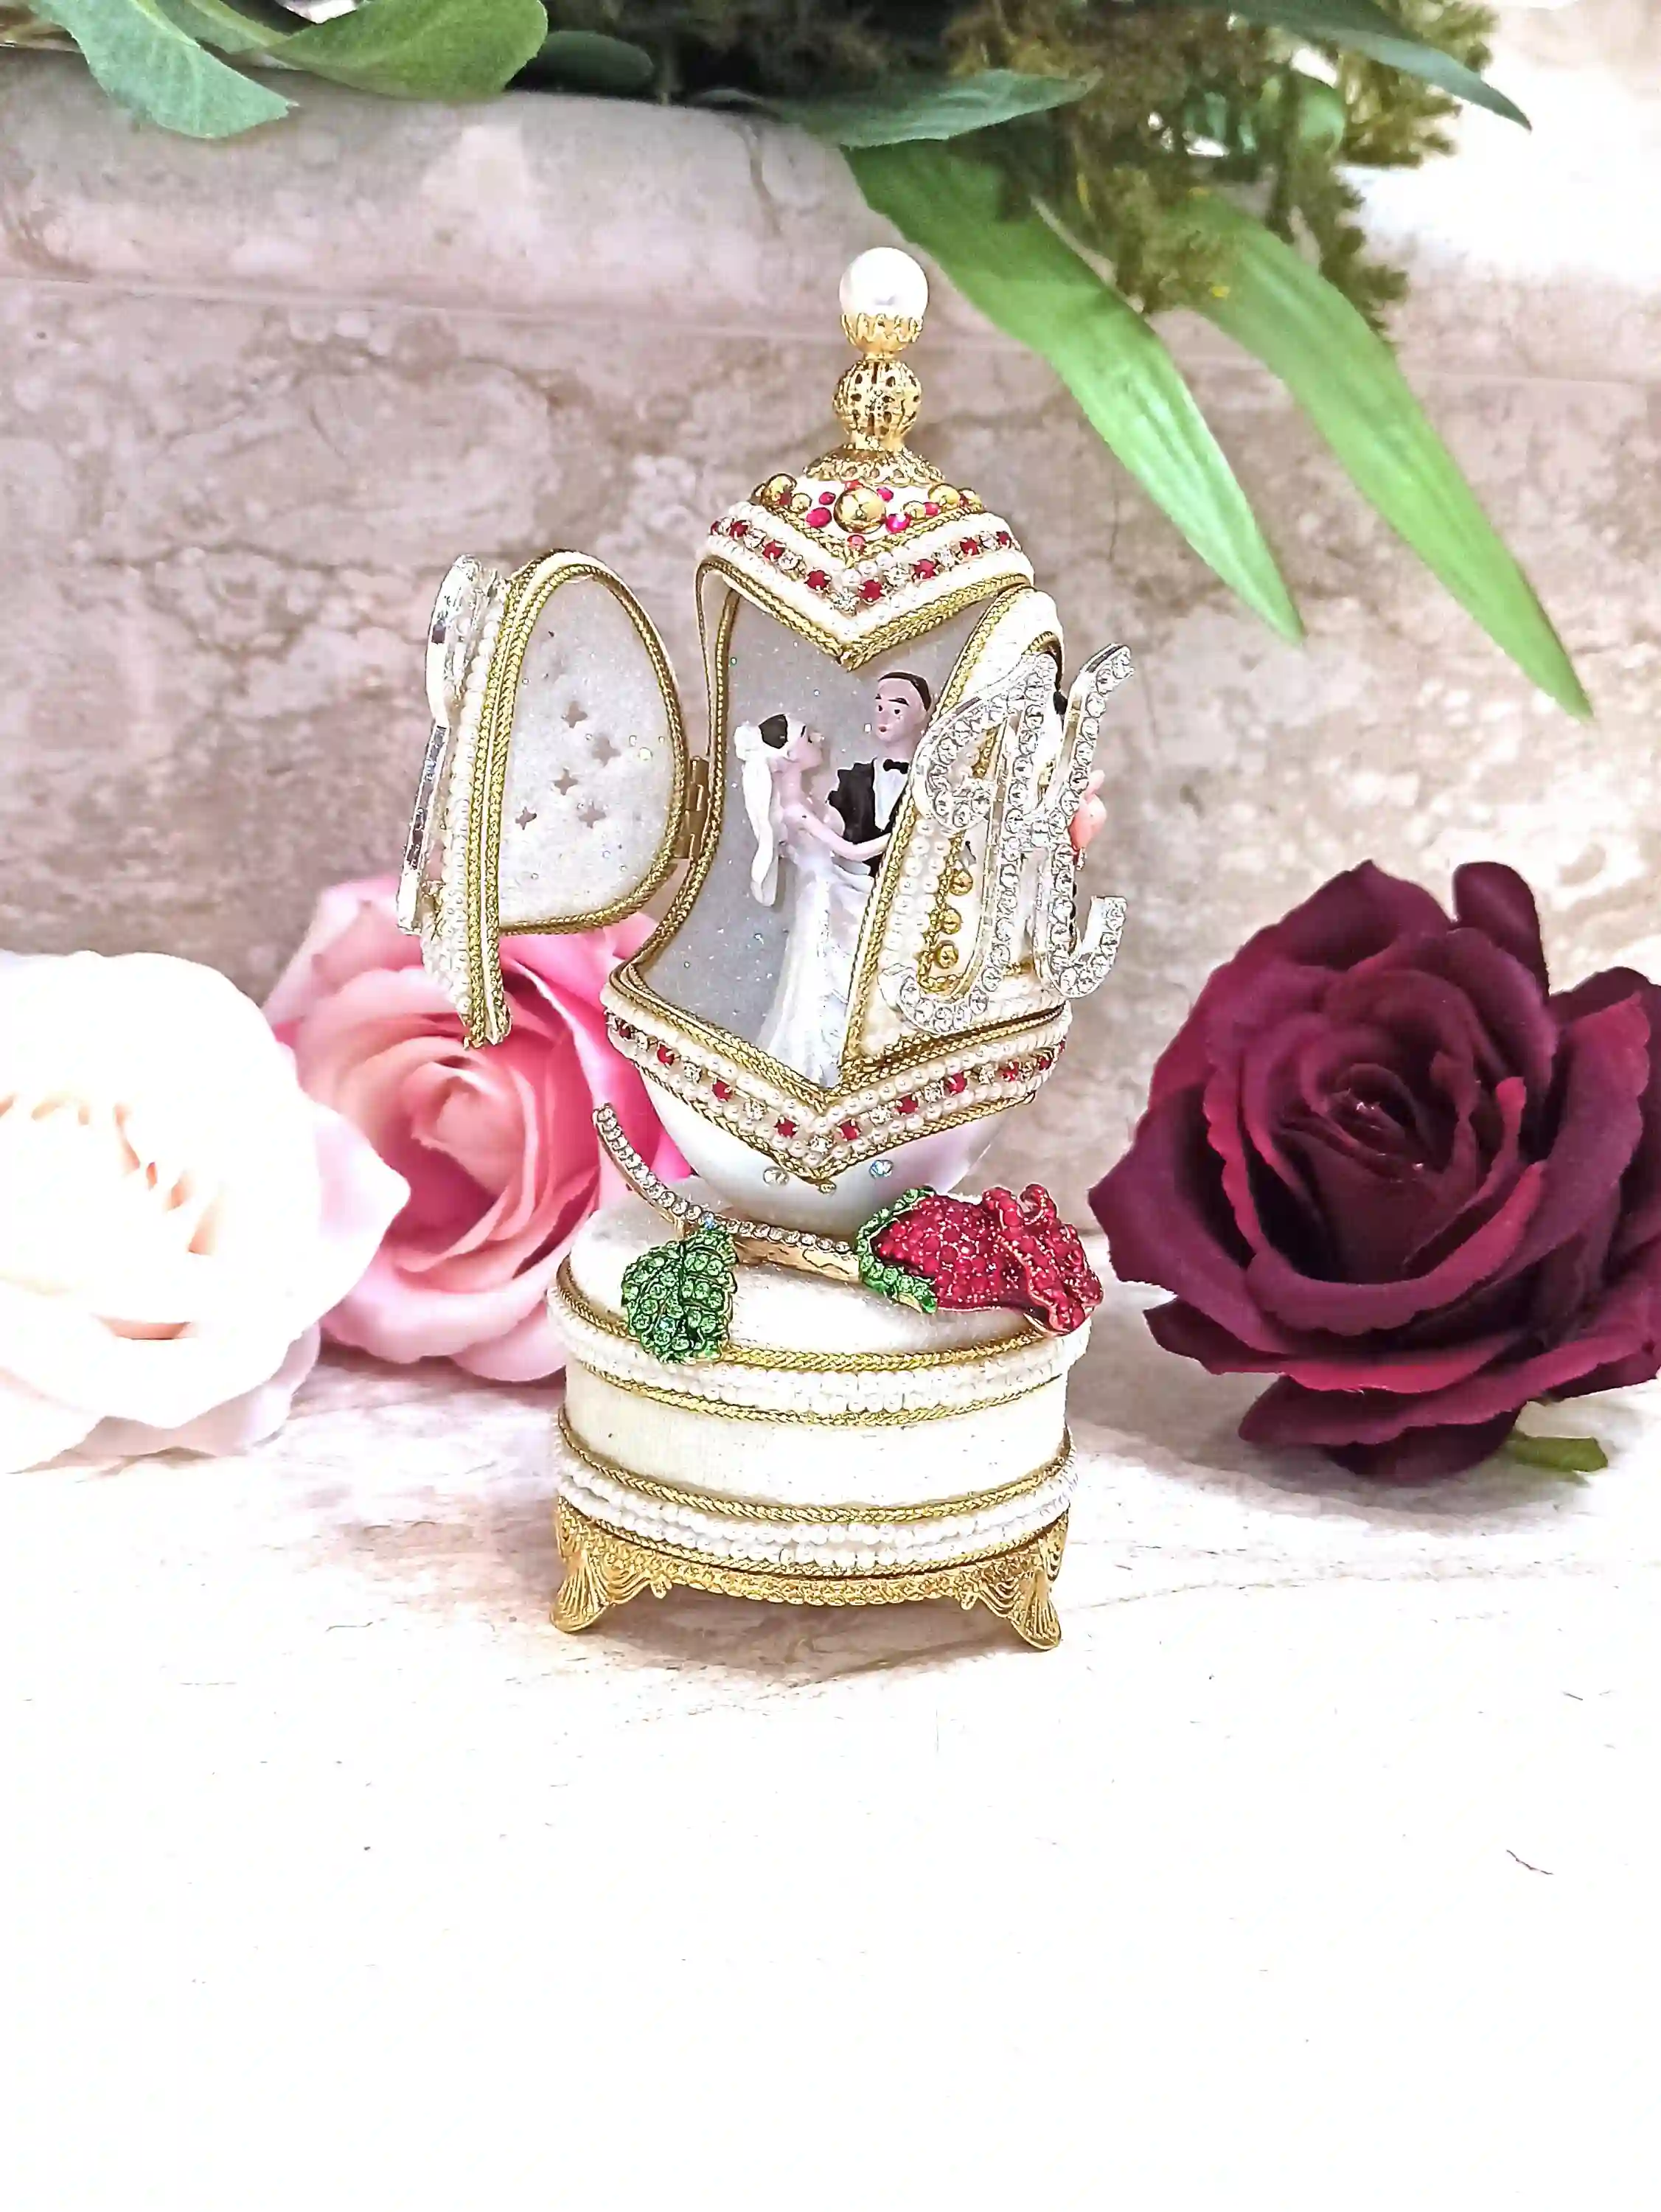 Luxury Wedding Gift, Faberge egg style Personalized, 24k GOLD, Ruby Anniversary, 5ct, Faberge Music Box, Wedding ornament, HANDCARVE,Faberge 